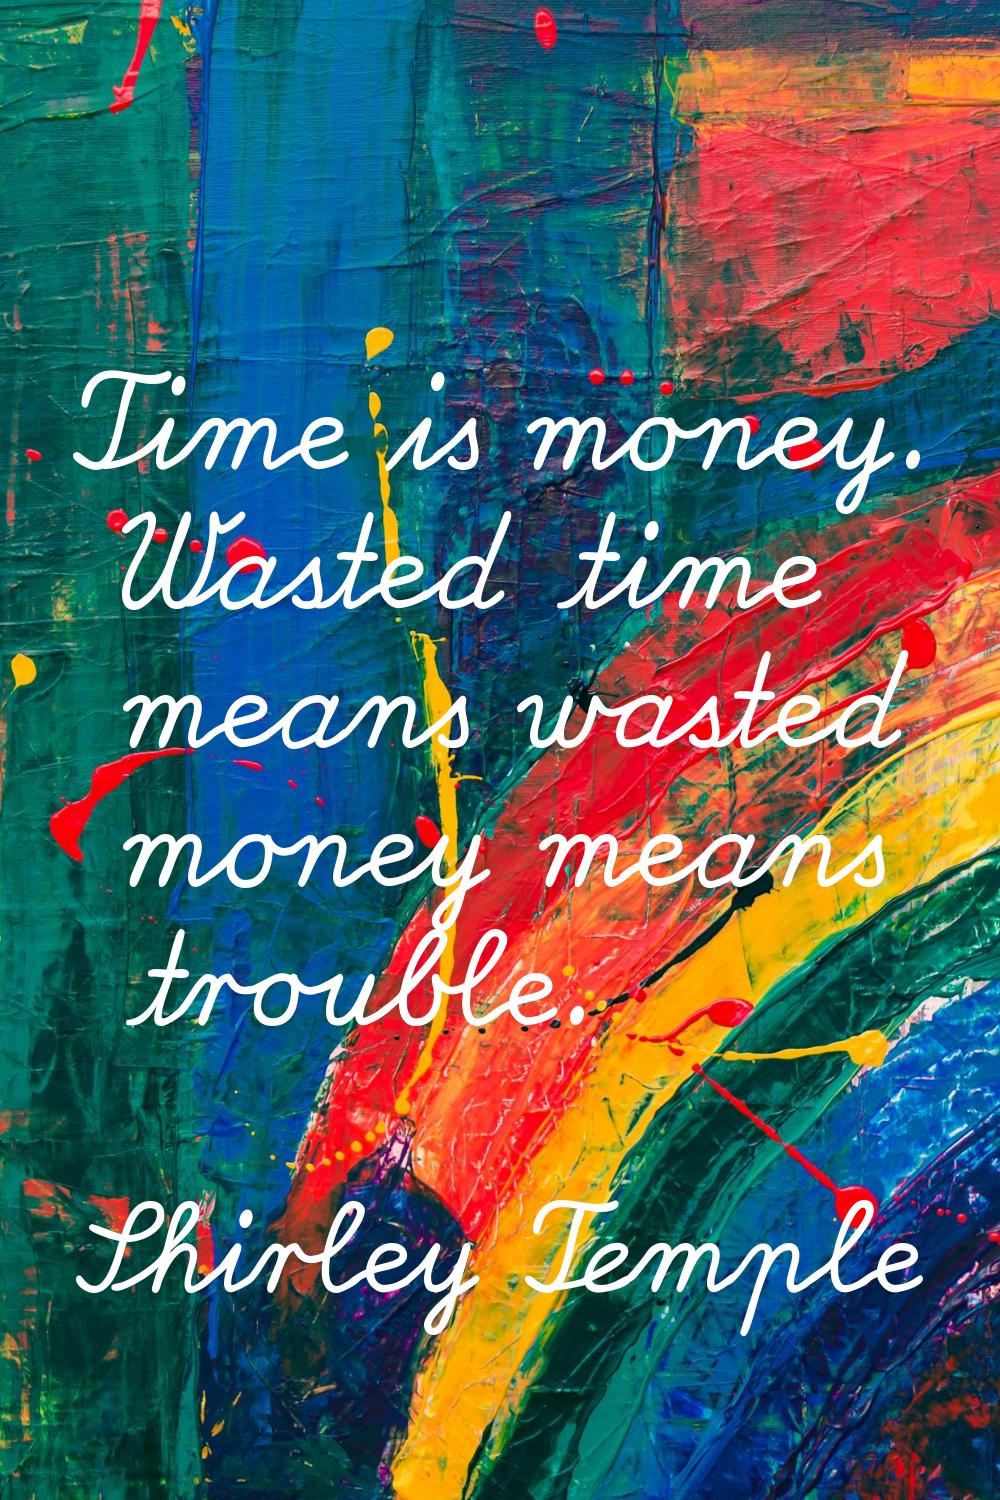 Time is money. Wasted time means wasted money means trouble.